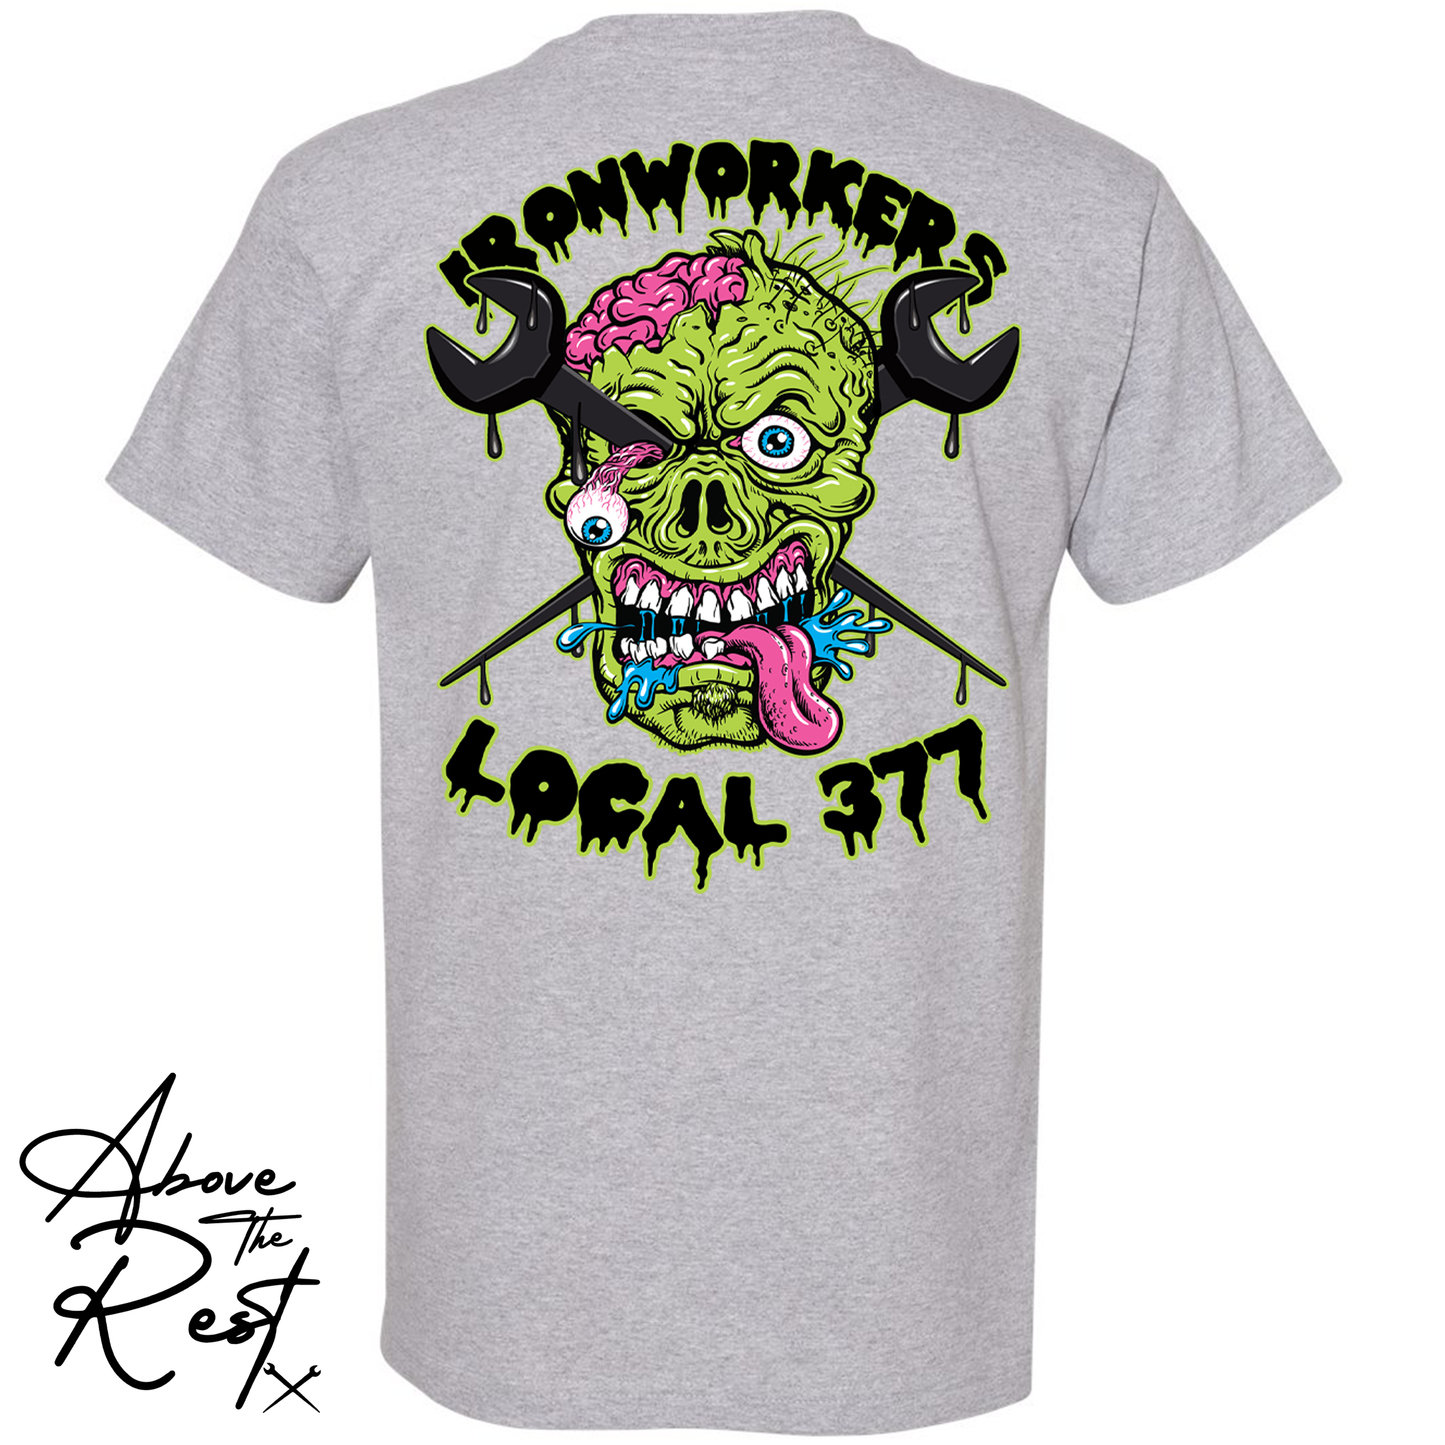 IW ZOMBIE T-SHIRT LOCAL 377